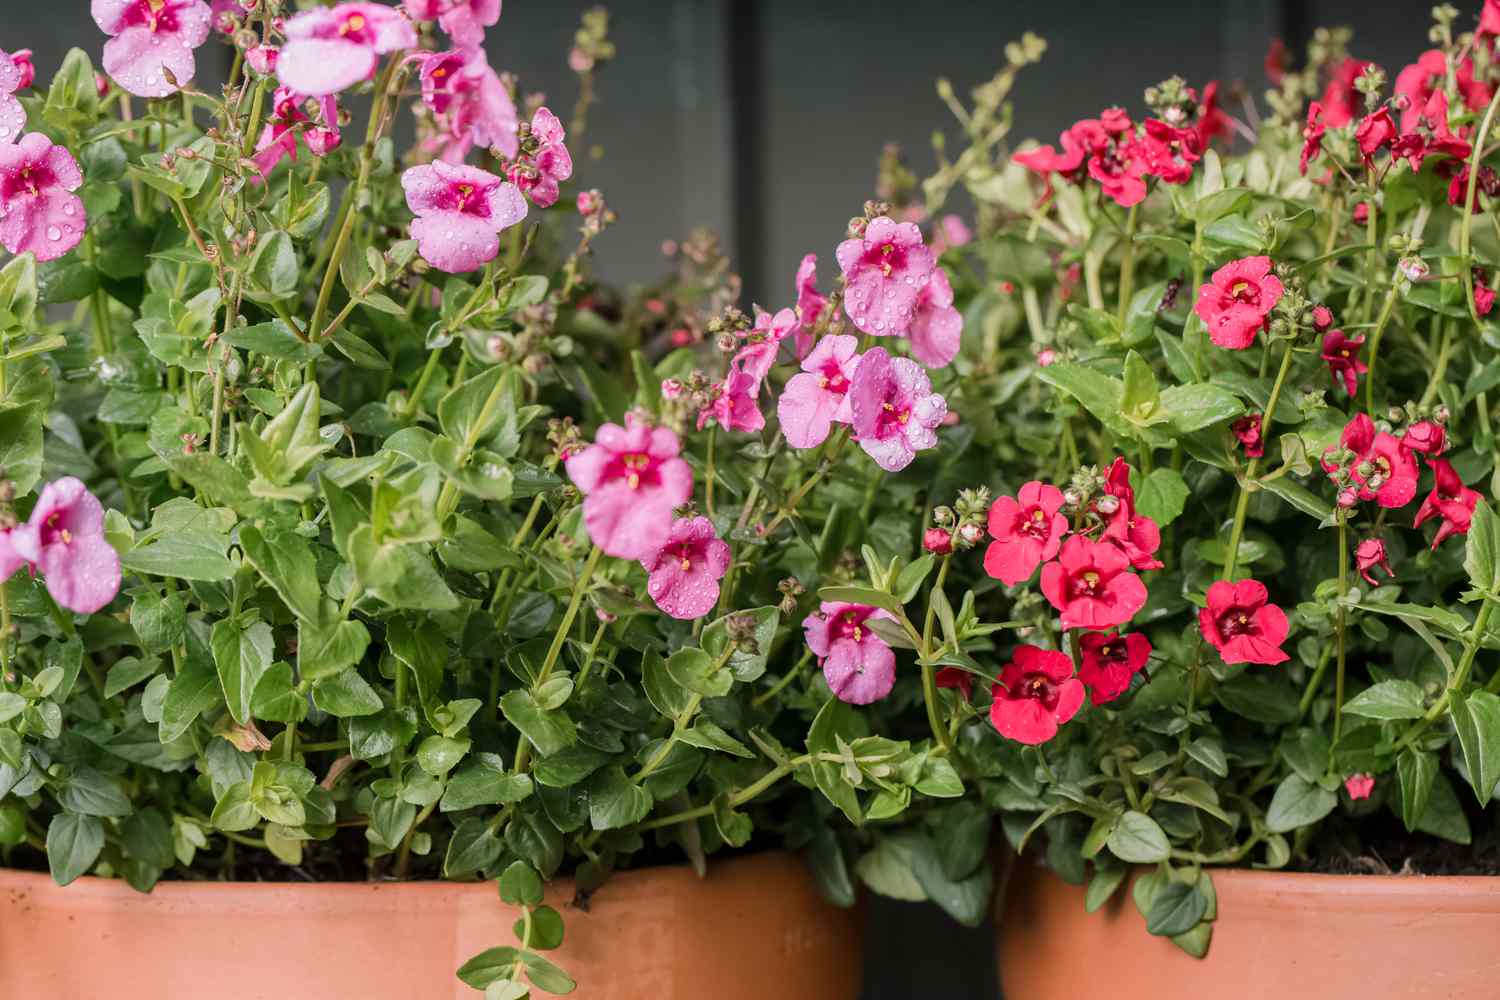 diascia flowers growing in containers